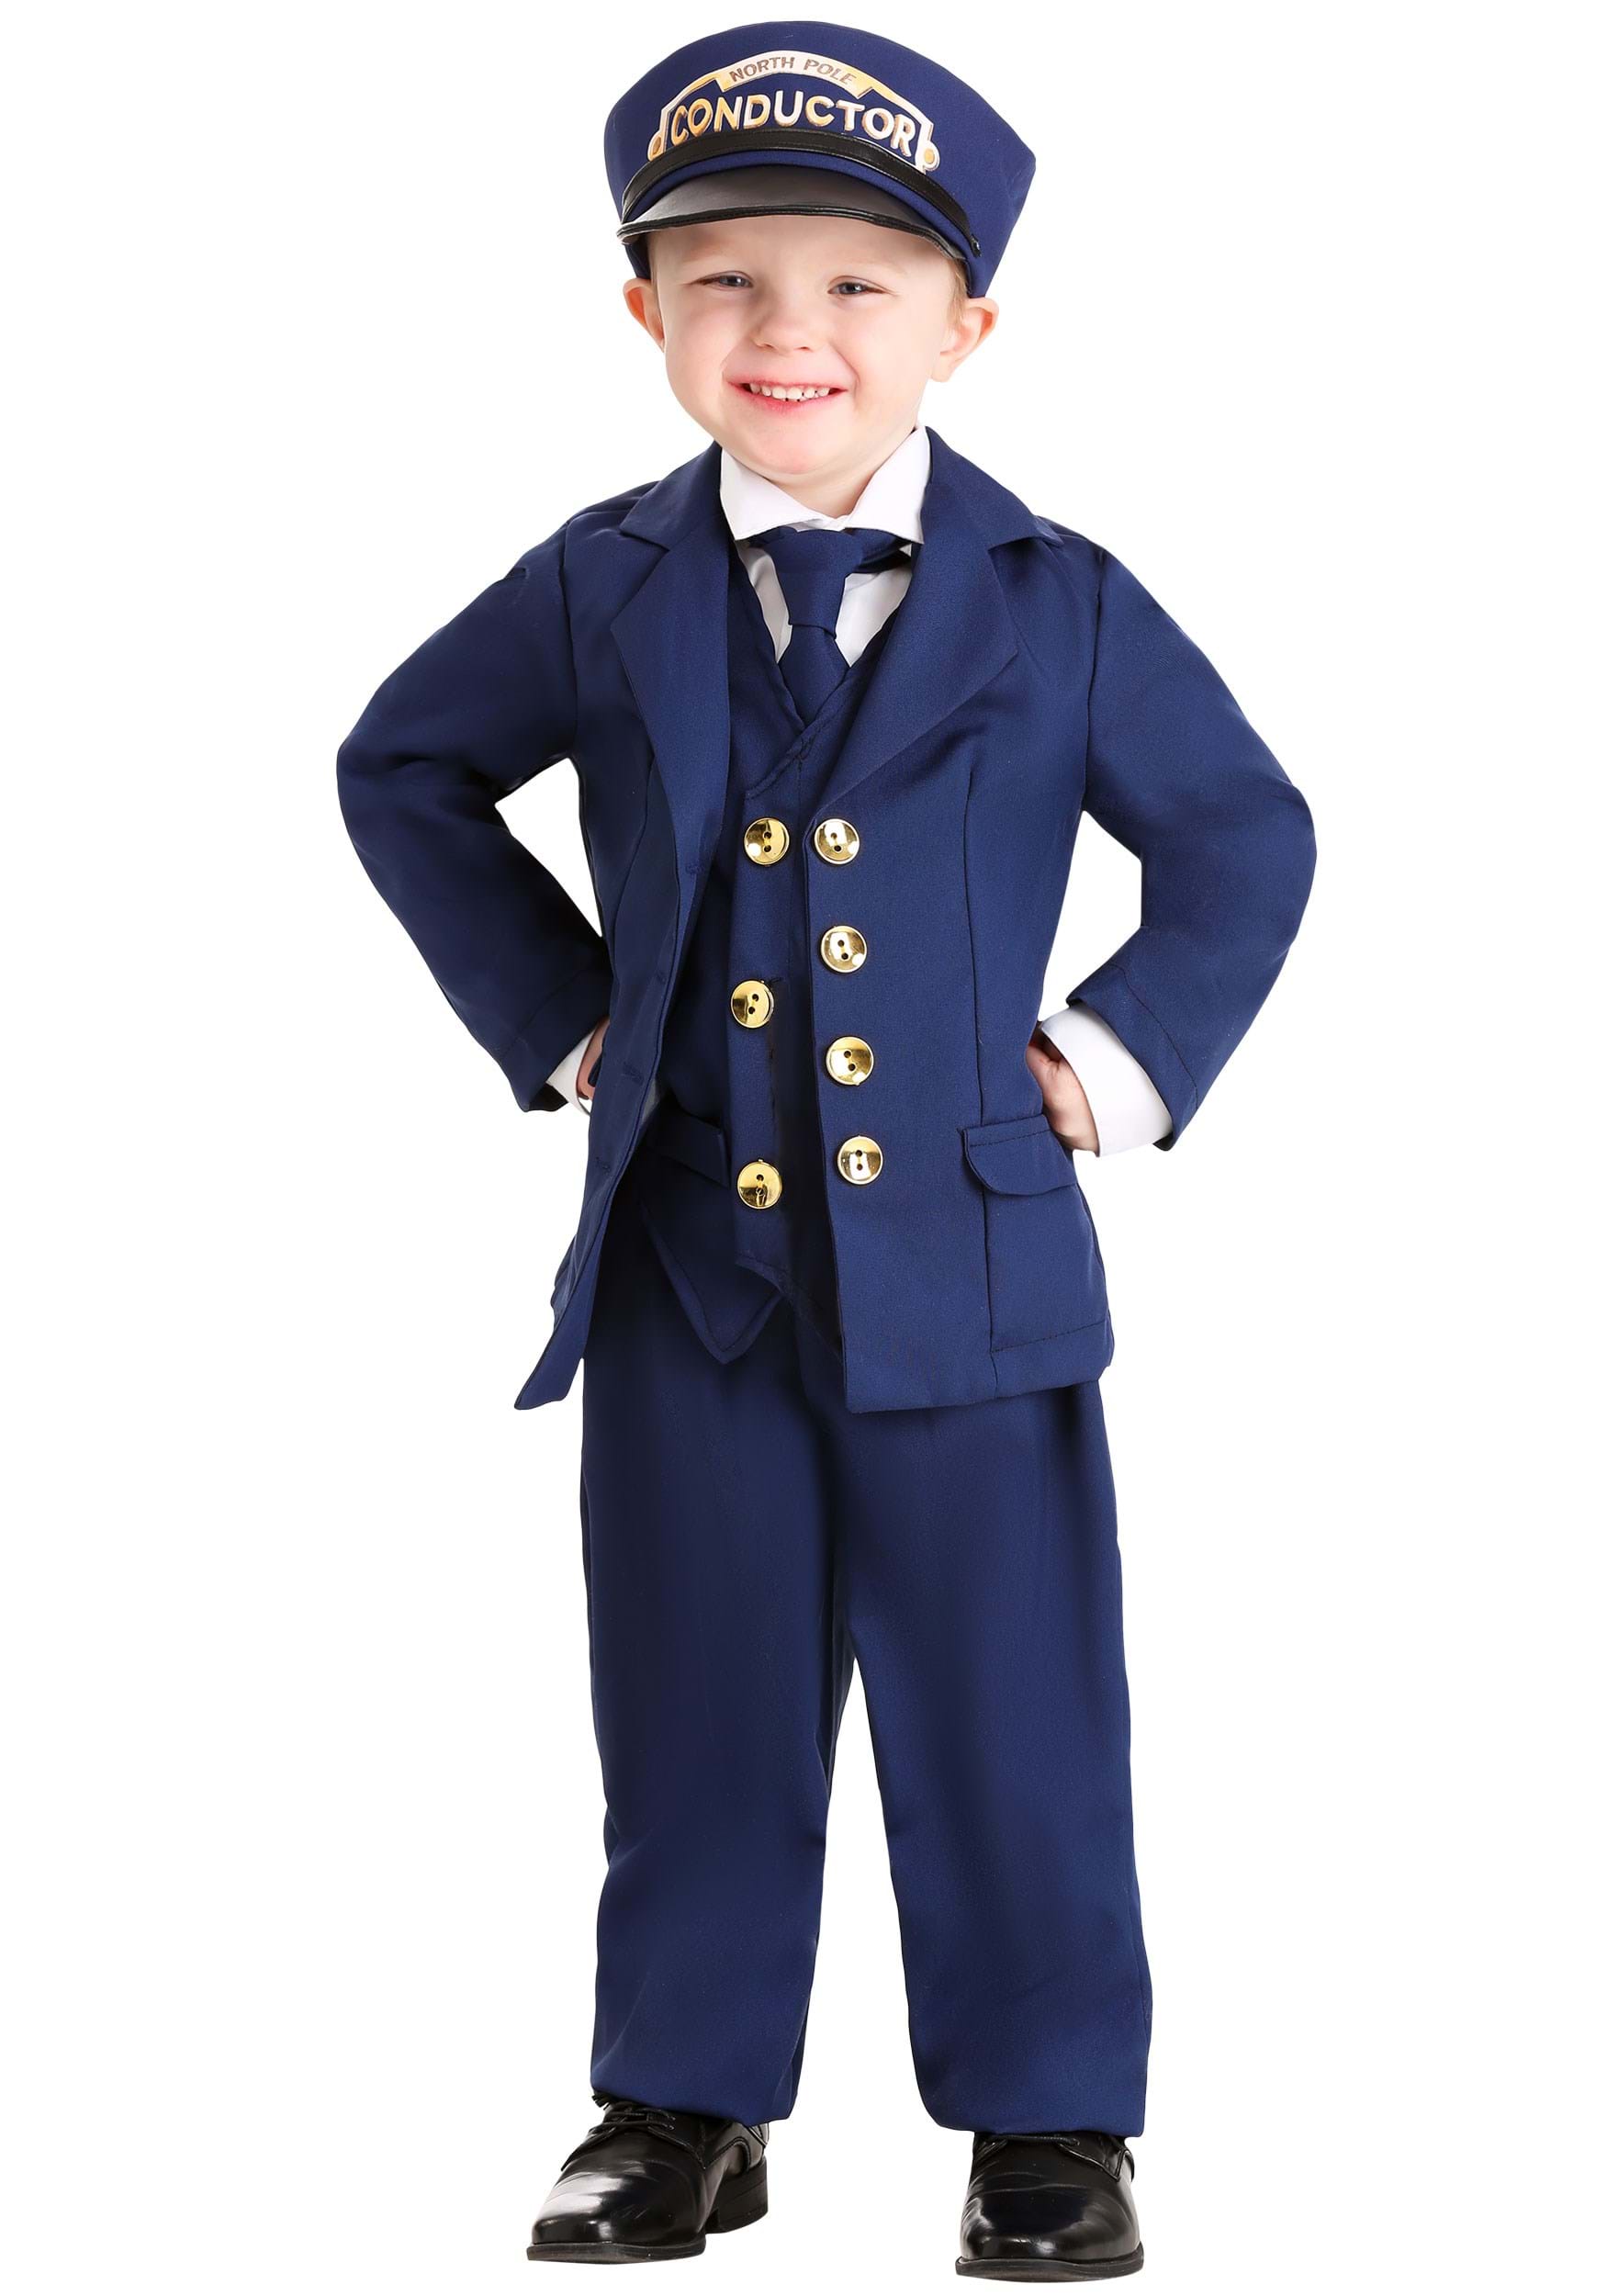 North Pole Train Conductor Costume for Toddlers